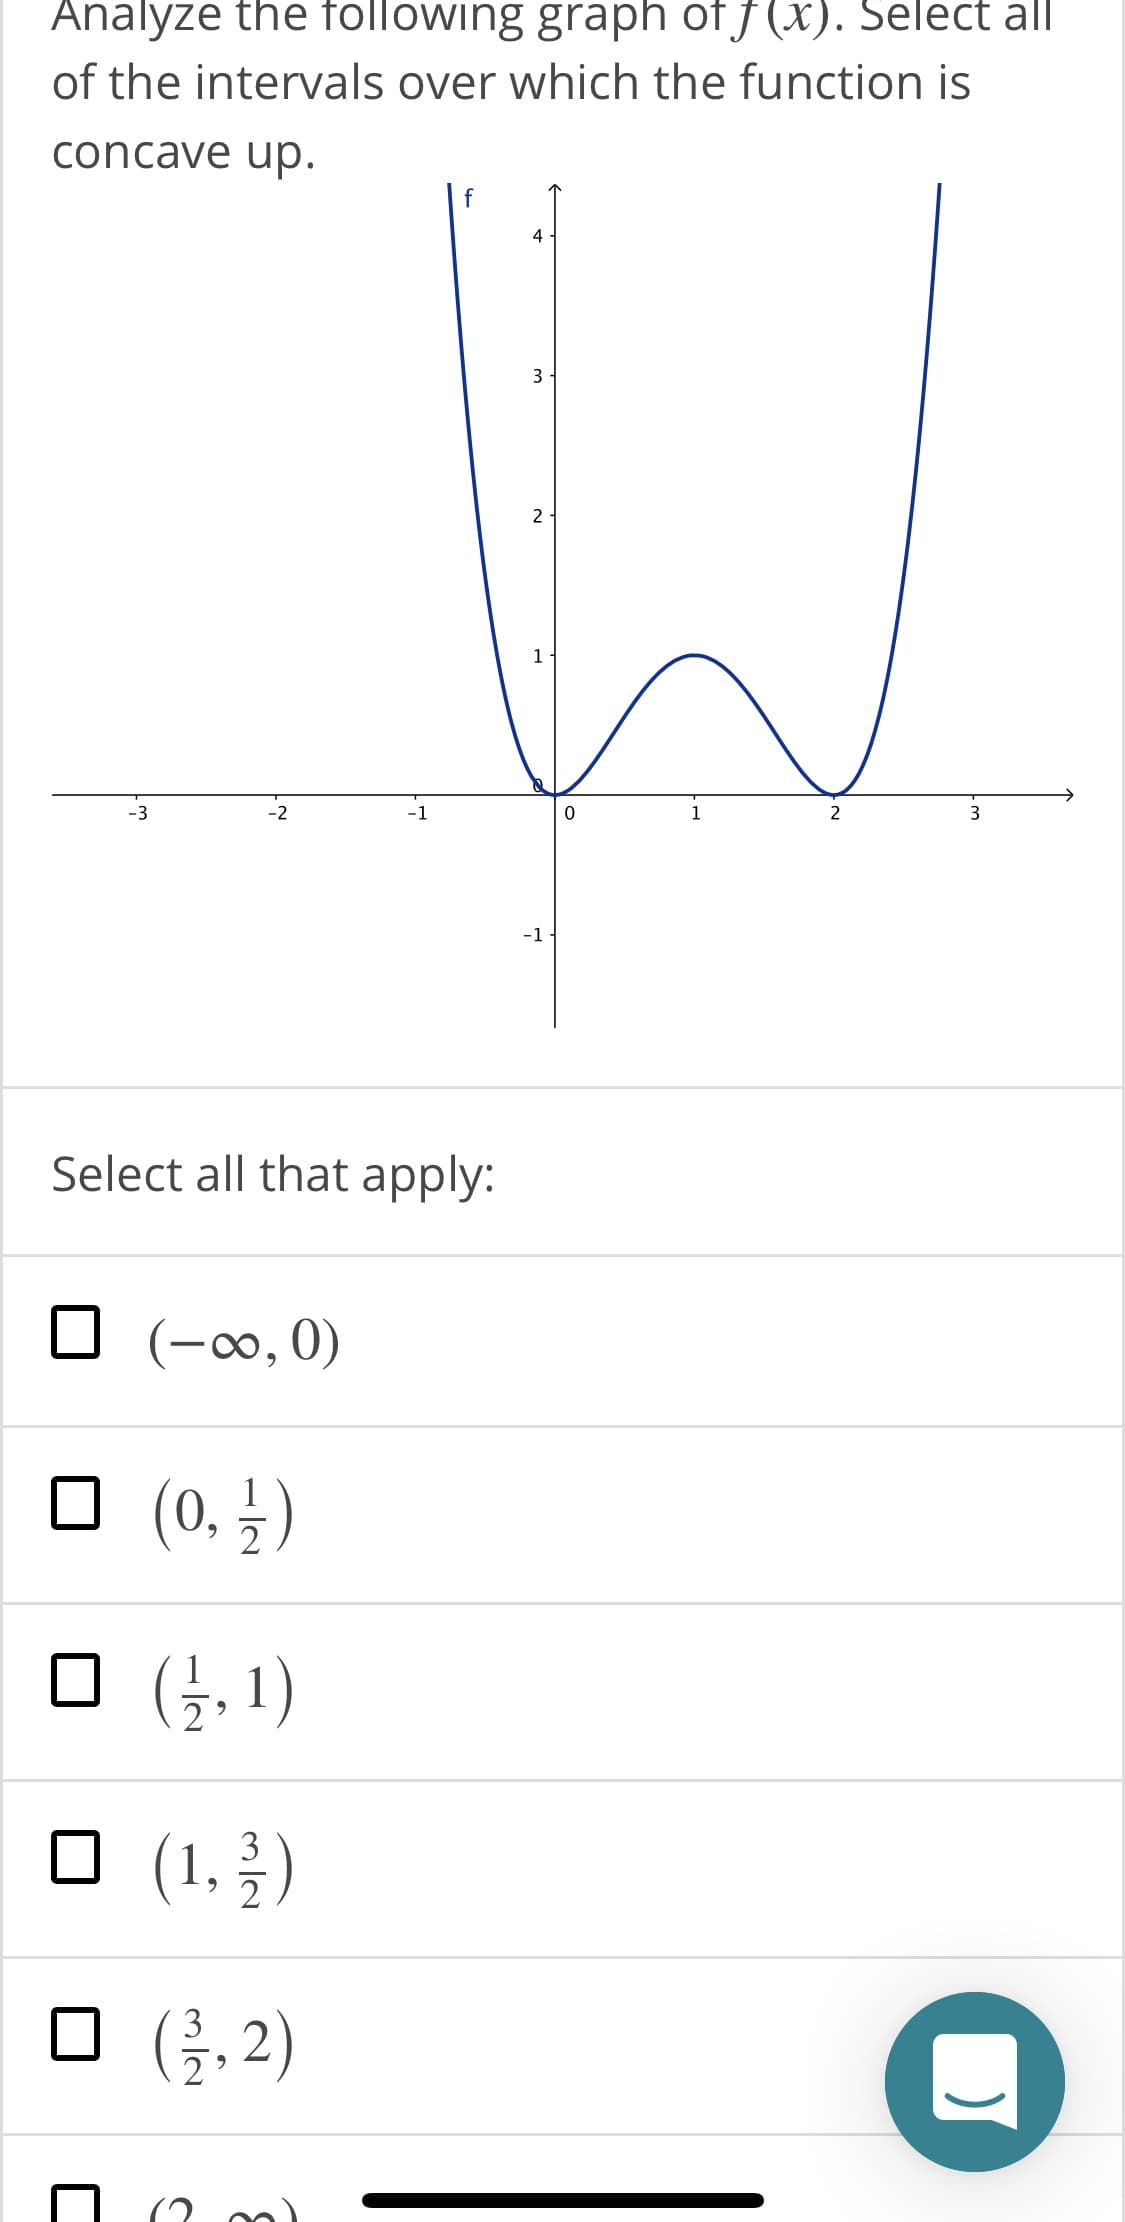 Analyze the following graph of f (x). Select all
of the intervals over which the function is
concave up.
4
3
-3
-2
-1
2
-1
Select all that apply:
(-∞, 0)
(0, †)
O (3, 1)
O (1,})
3
O (,2)
